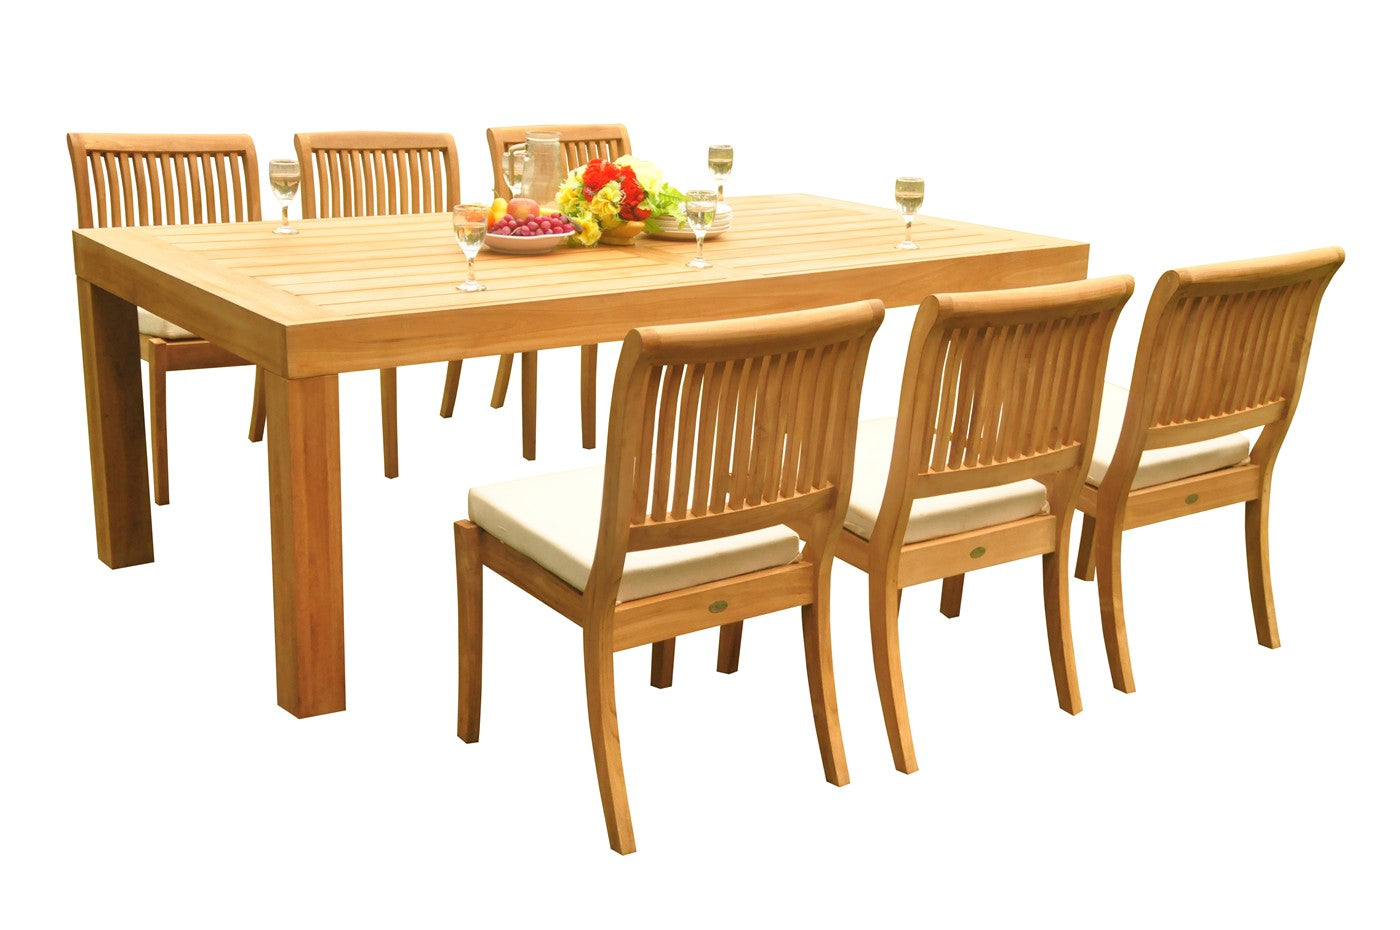 86" Canberra Table with Arbor Armless Chairs